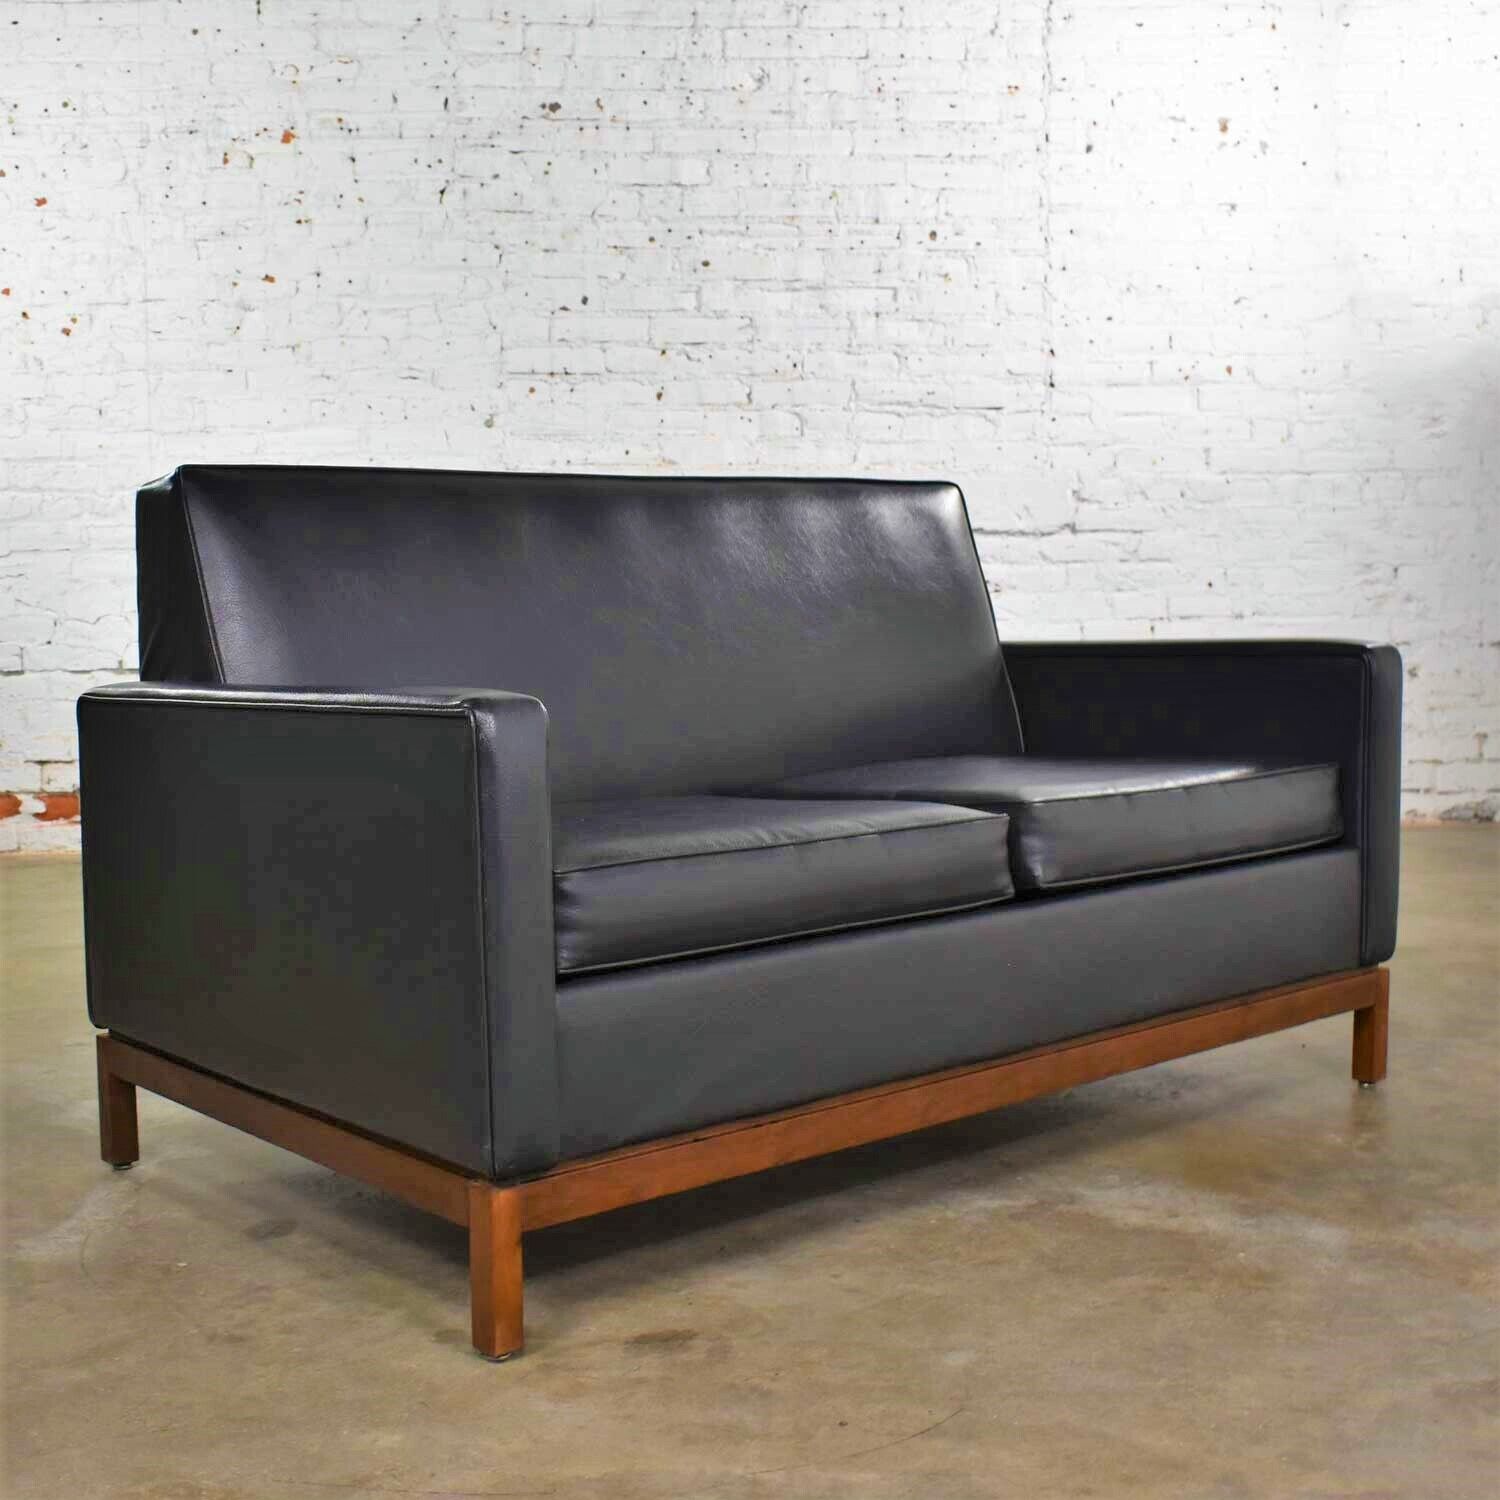 Mid Century Modern Black Faux Leather Love Seat Sofa by Taylor Chair Co. Style D